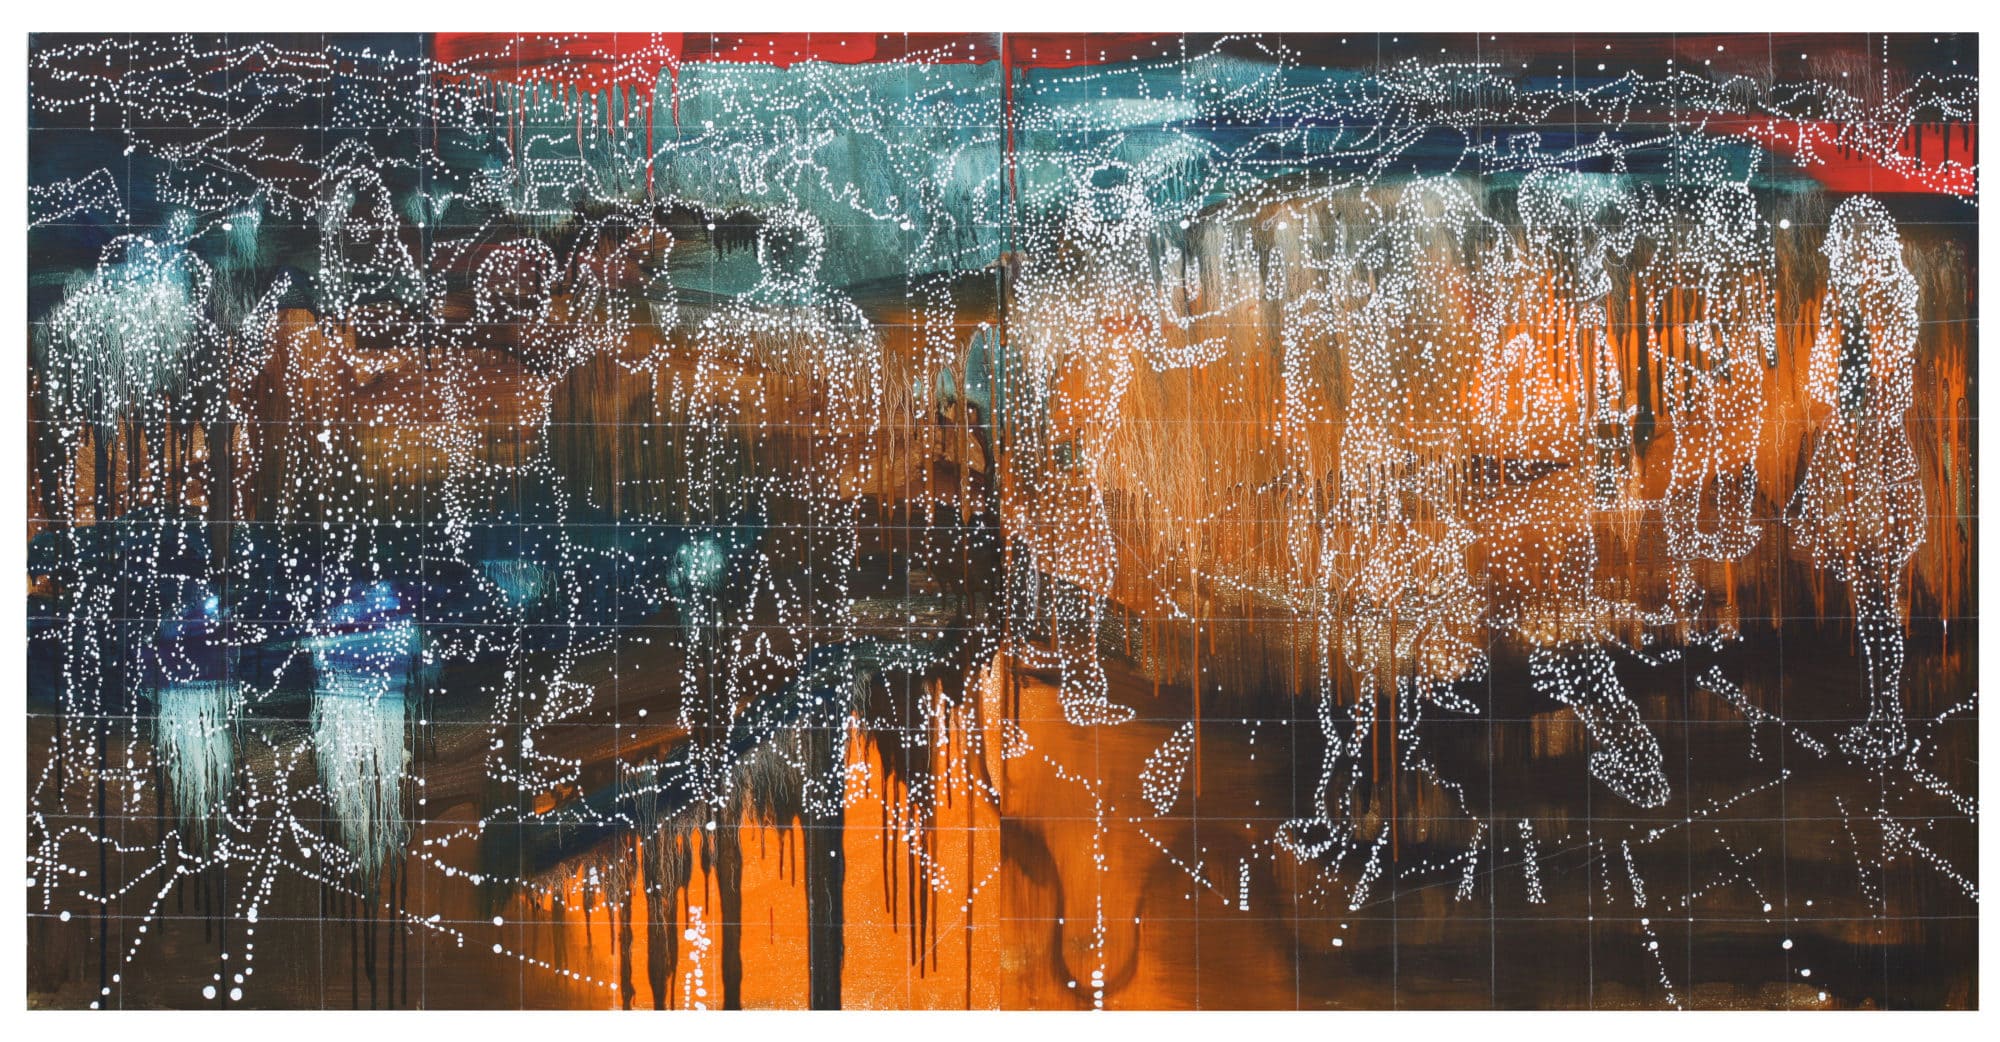 ‘The decade positions’, 2017, oil and acrylic on linen, 100 x 200 cm